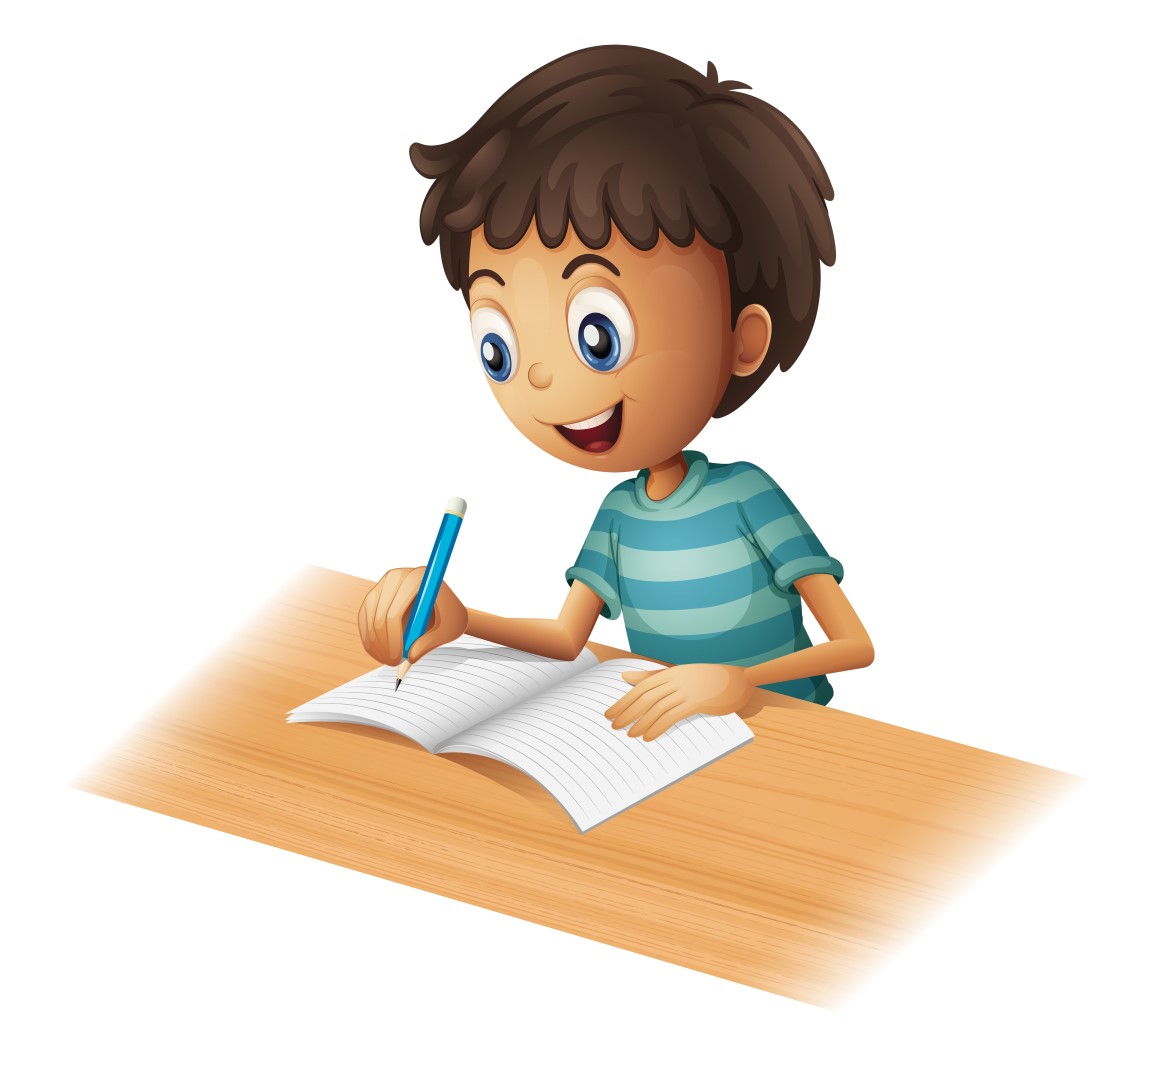 Illustration of a boy writing on a white background